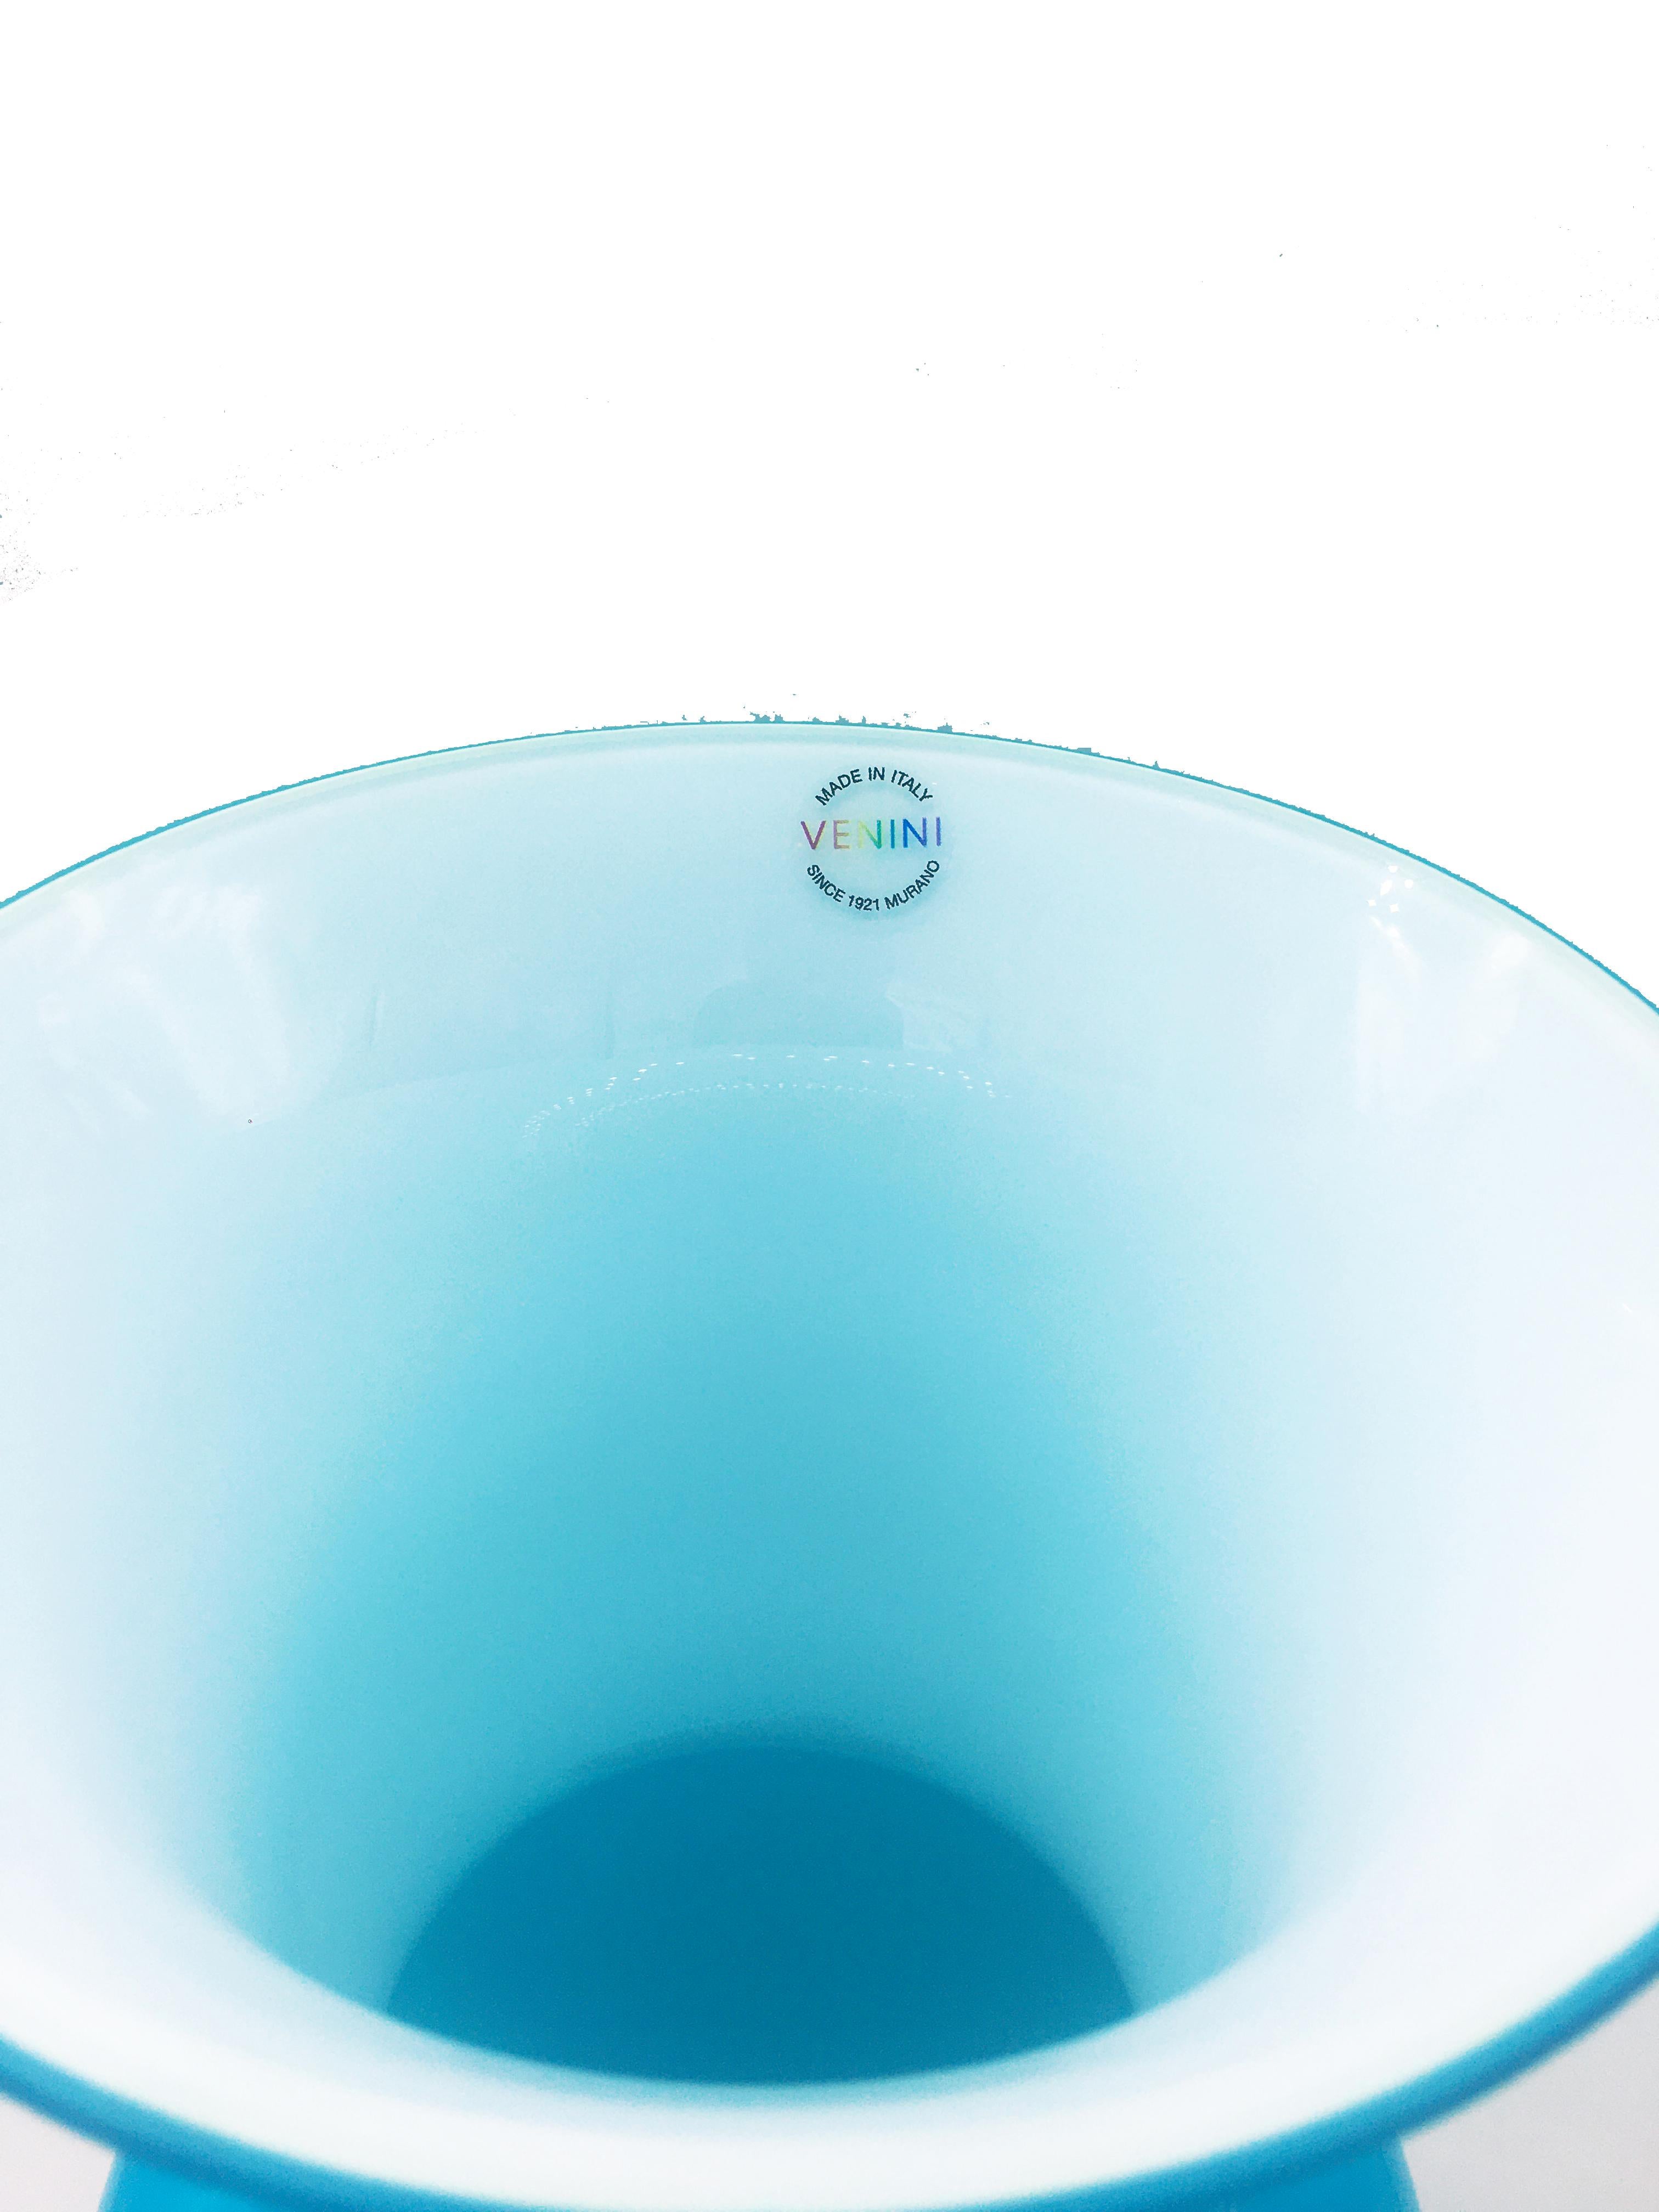 Venini glass vase with slim, oval shaped body and funnel shaped neck. Featured in aquamarine colored glass.